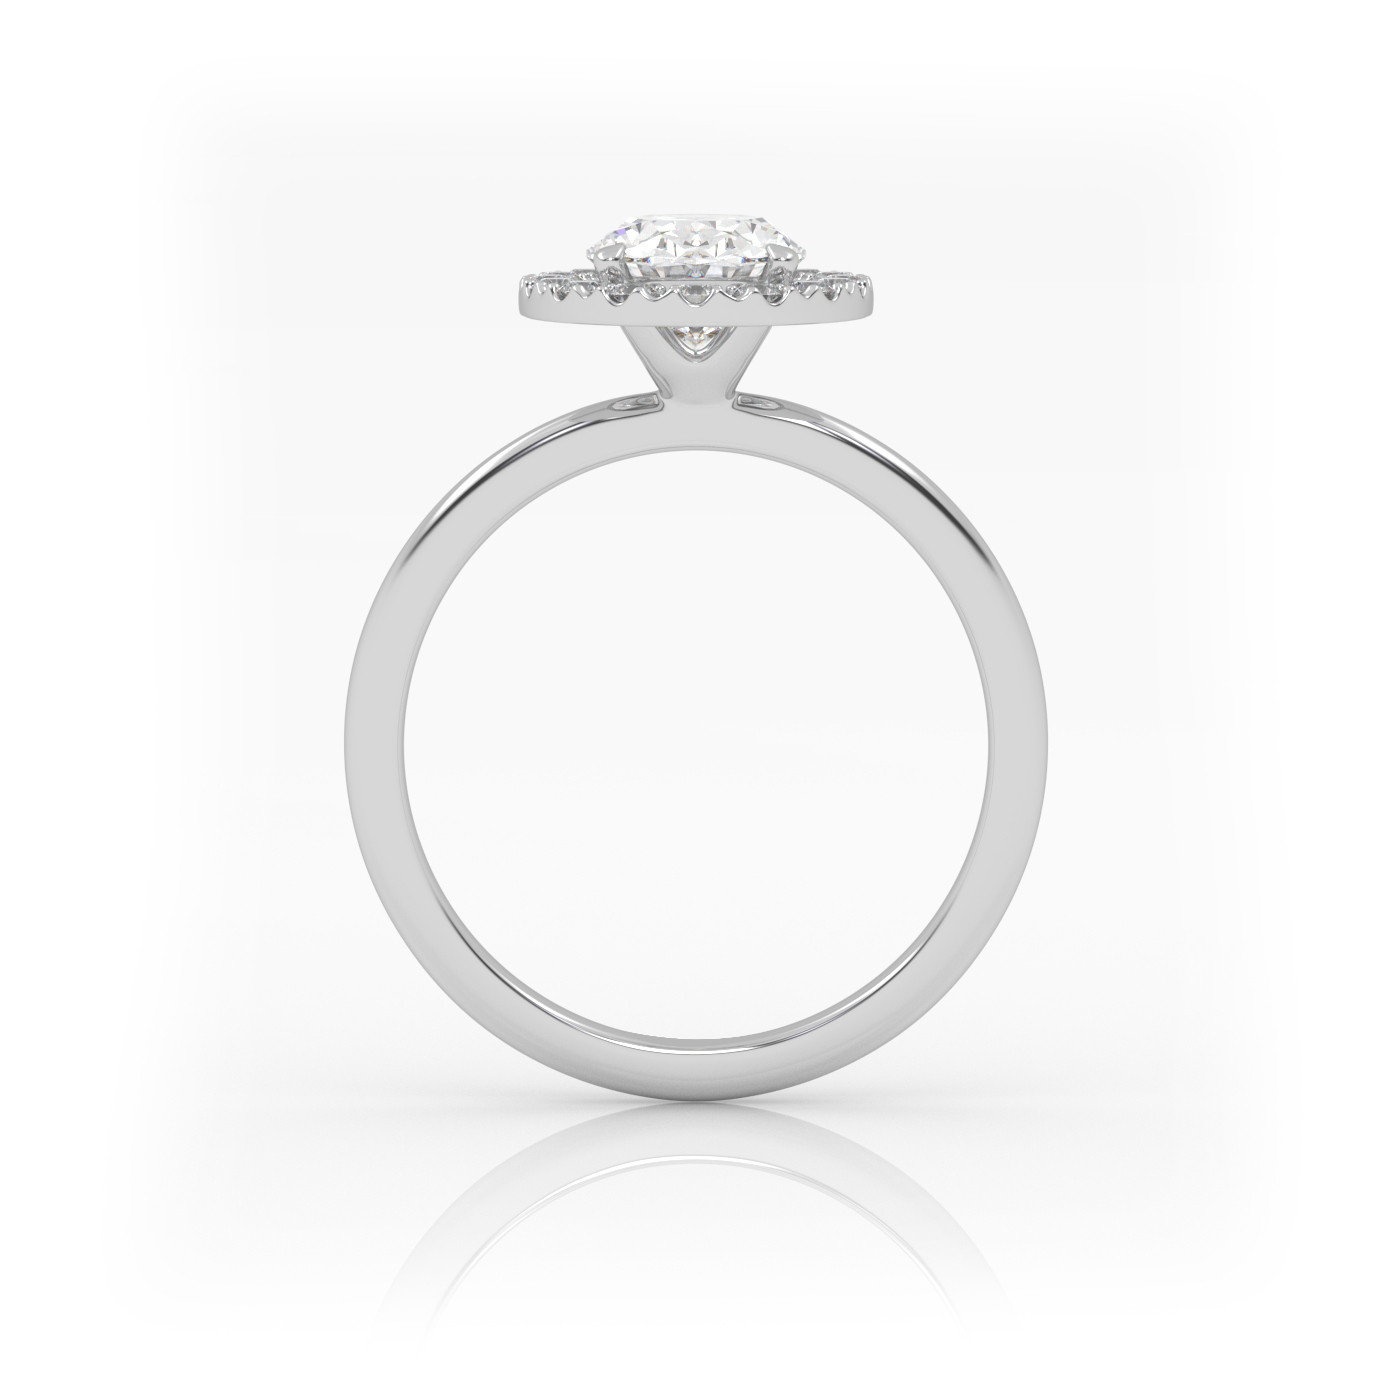 18K WHITE GOLD Oval Diamond Engagement Ring with Halo Style